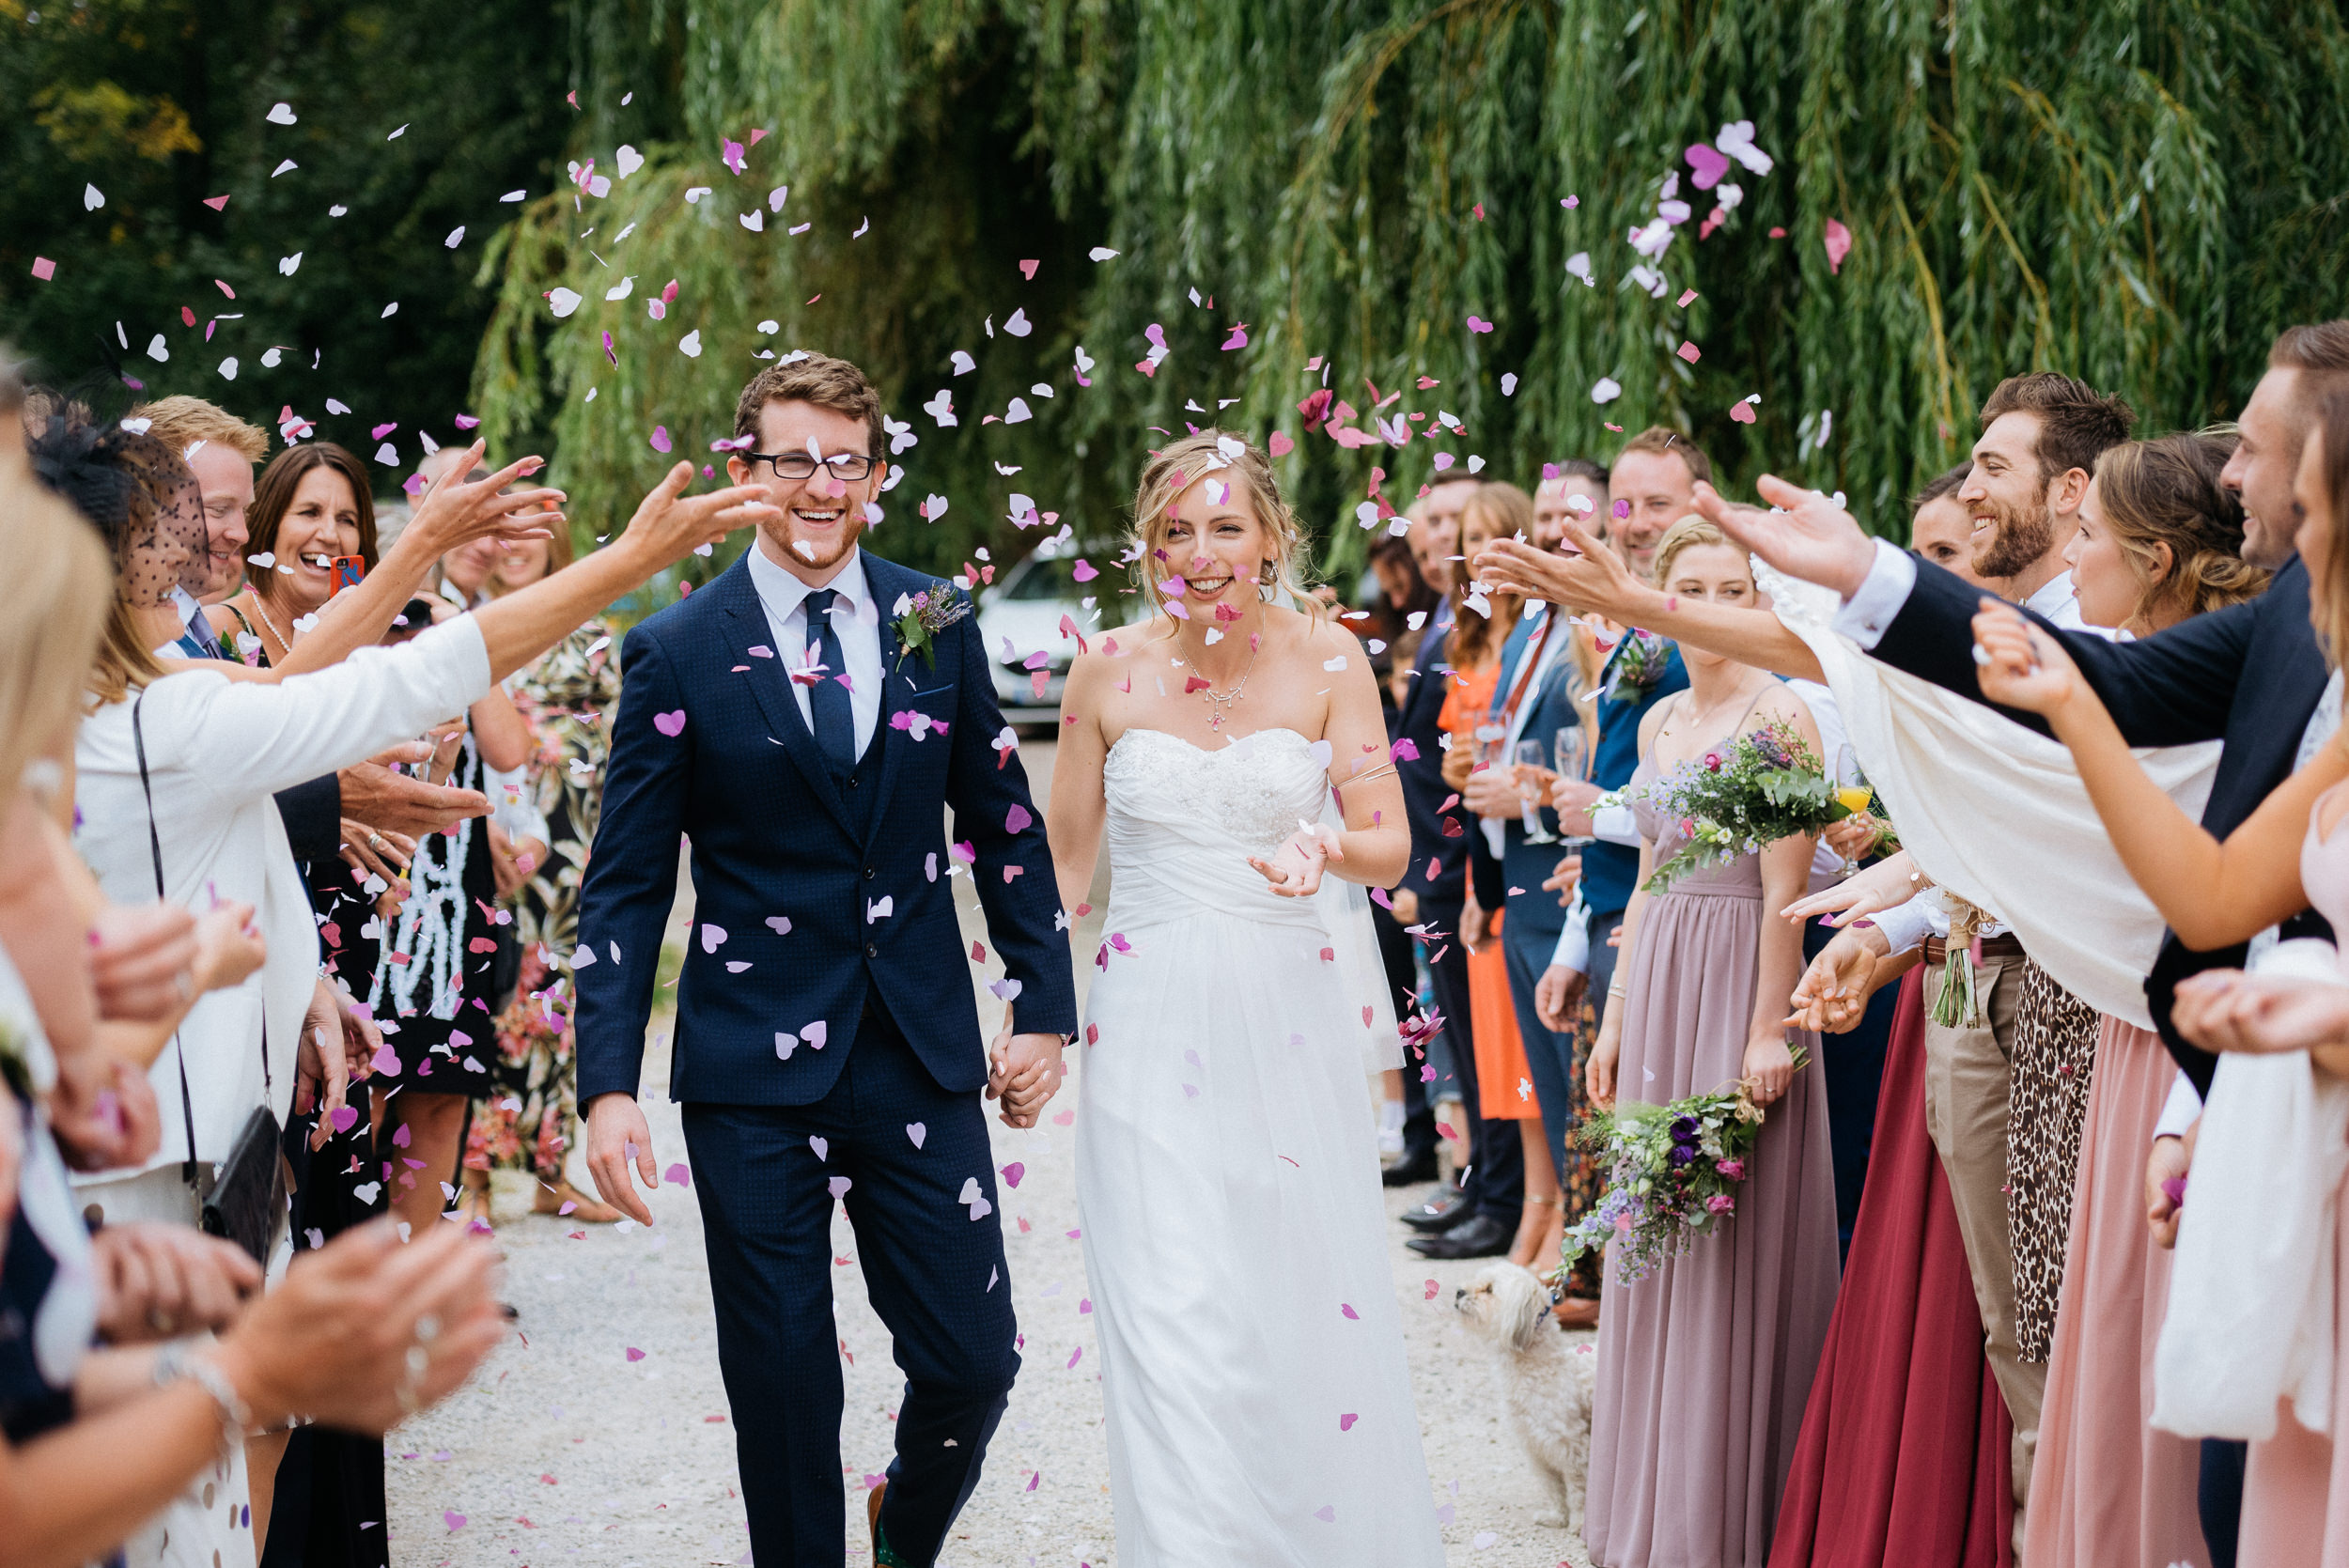 Bride and groom loving the confetti being thrown over them at Risley Hall